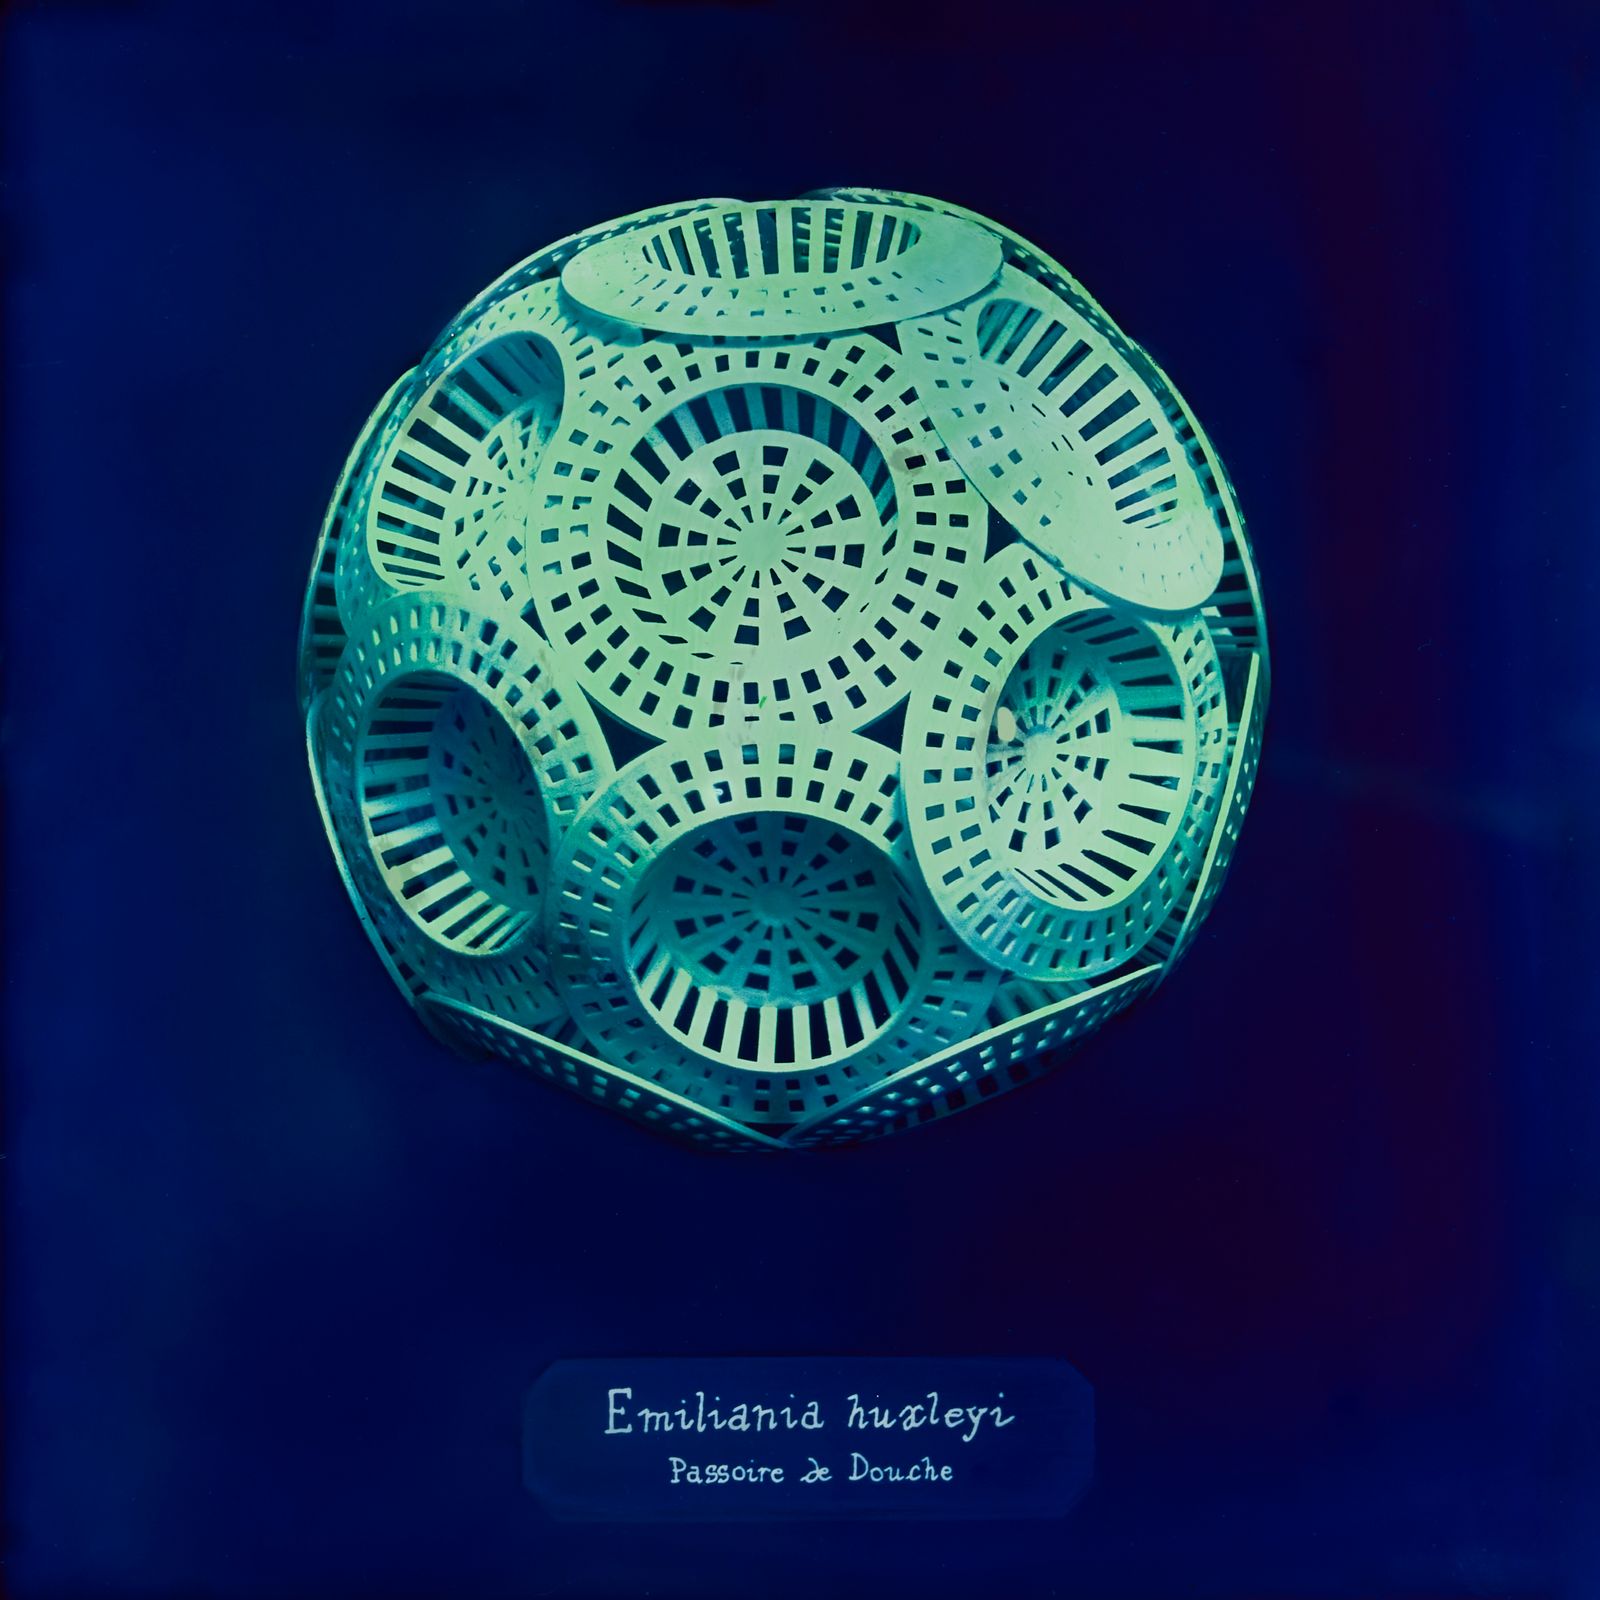 © Manon Lanjouère - Emiliania huxleyi, Cluster of shower sieves, Cyanotype on glass and fluorescent vynil emulsion, 20x20 cm